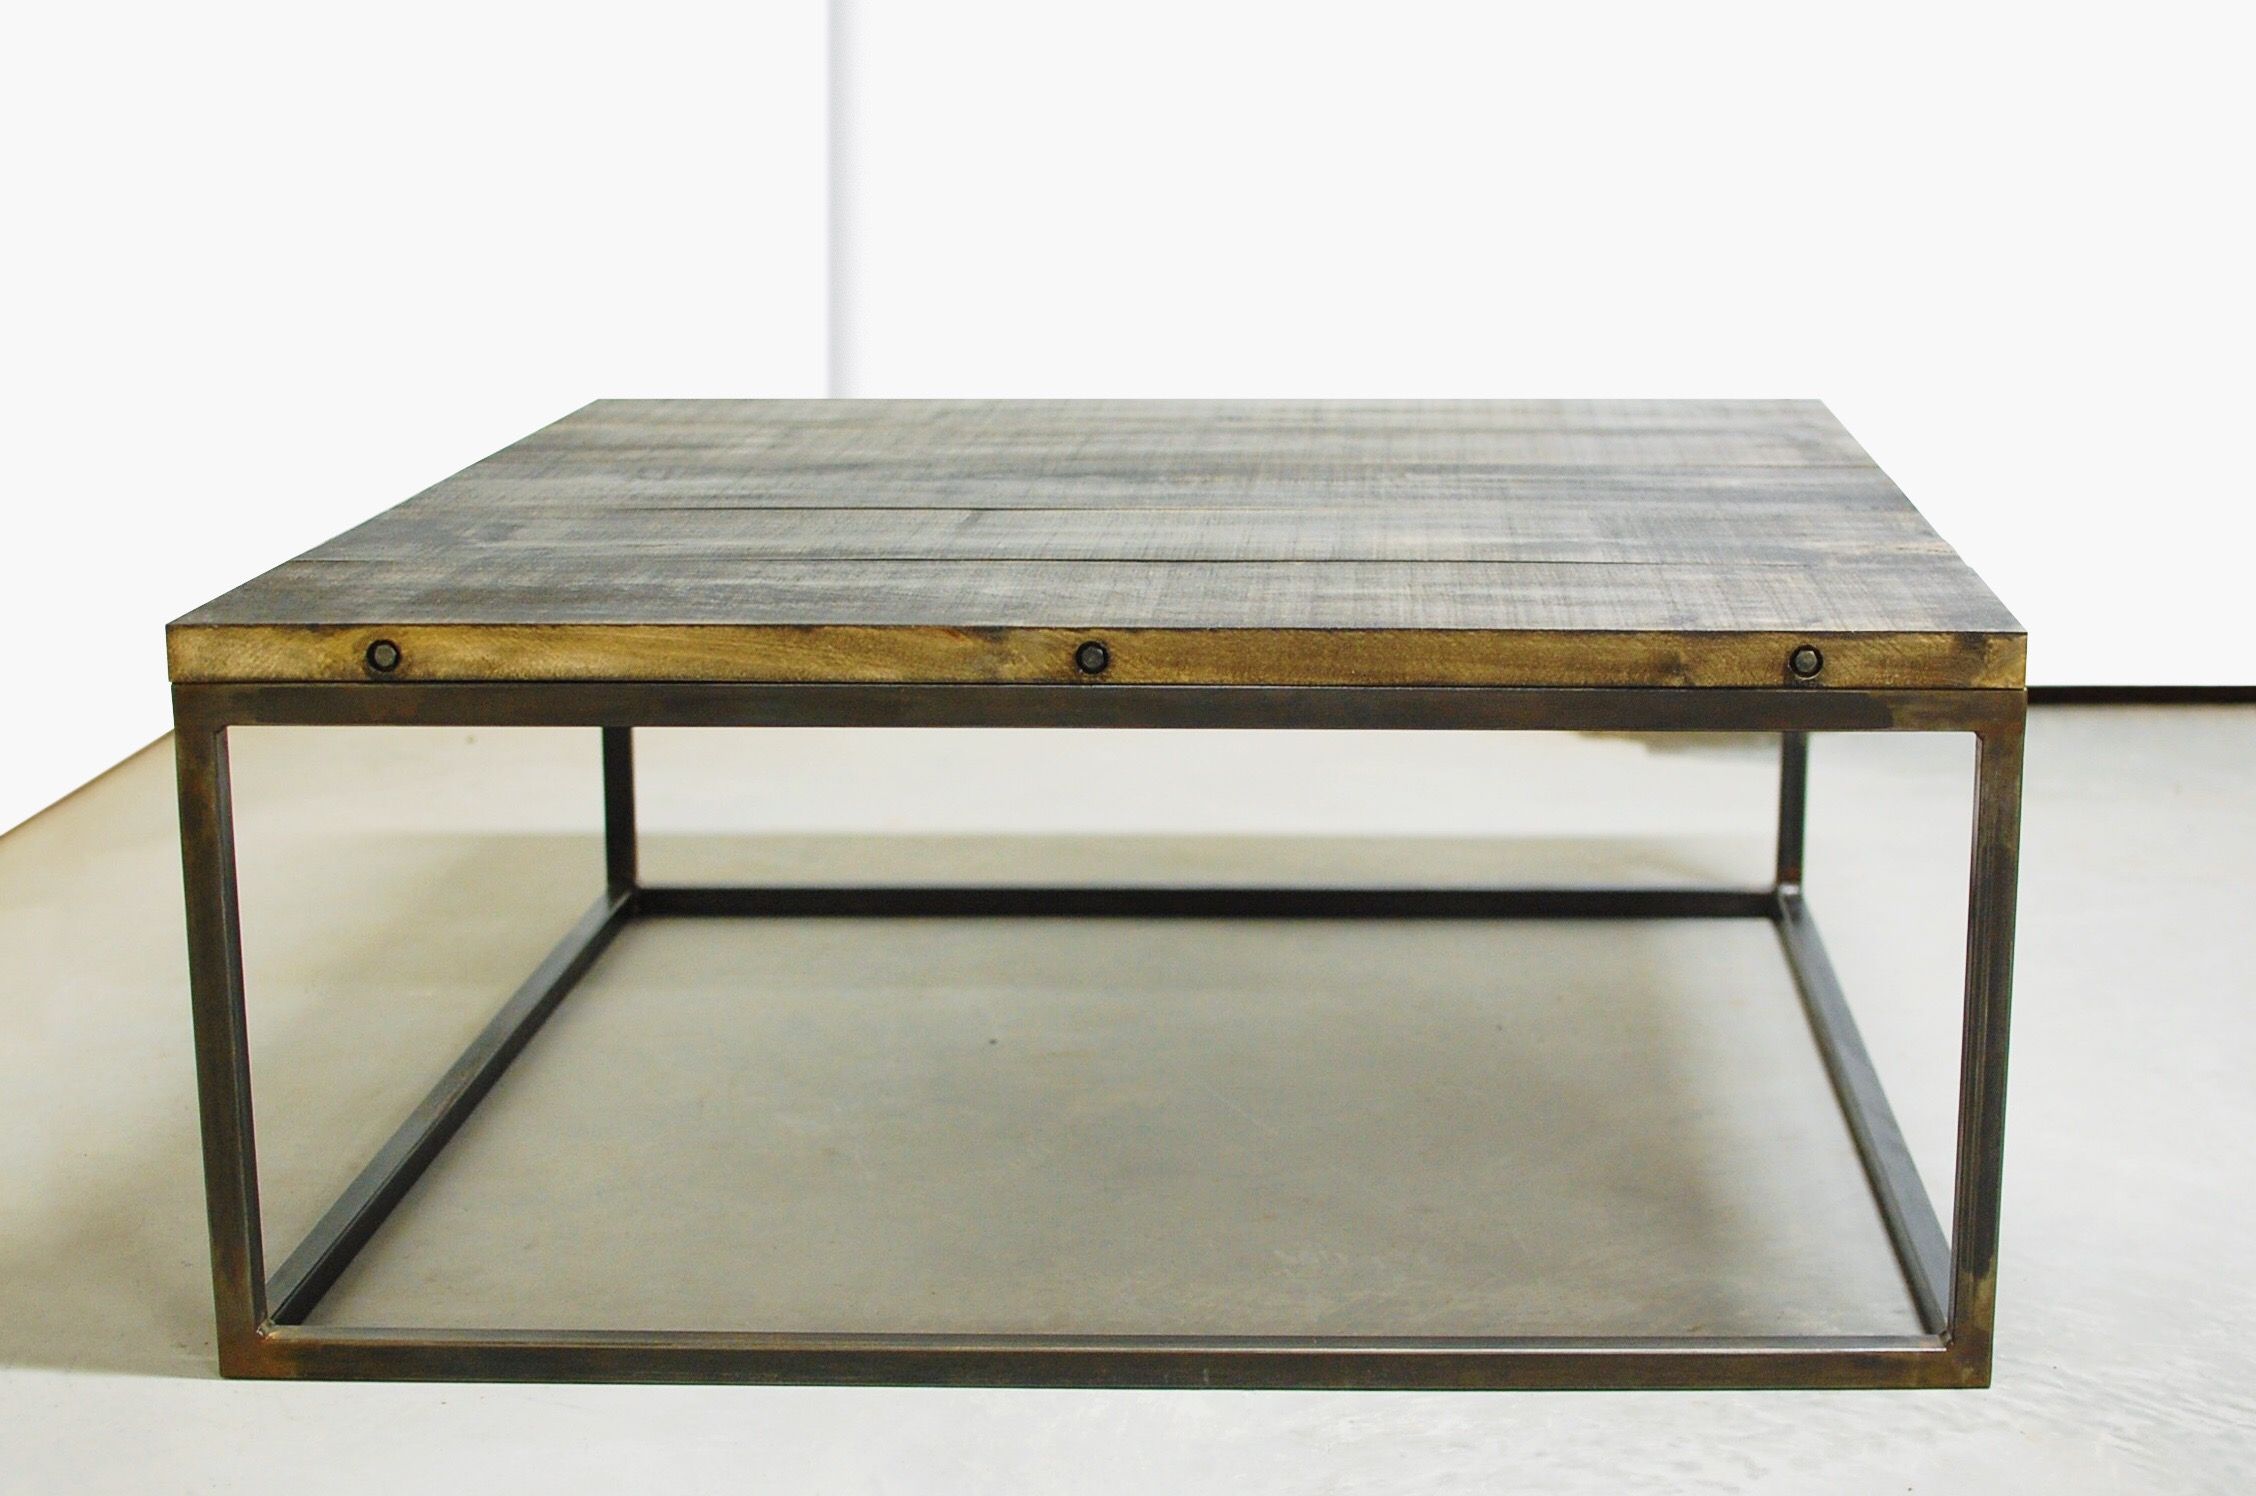 Custom Industrial Wood Coffee Table With Metal Legssouthern Sunshine |  Custommade Intended For Iron Legs Coffee Tables (View 8 of 20)